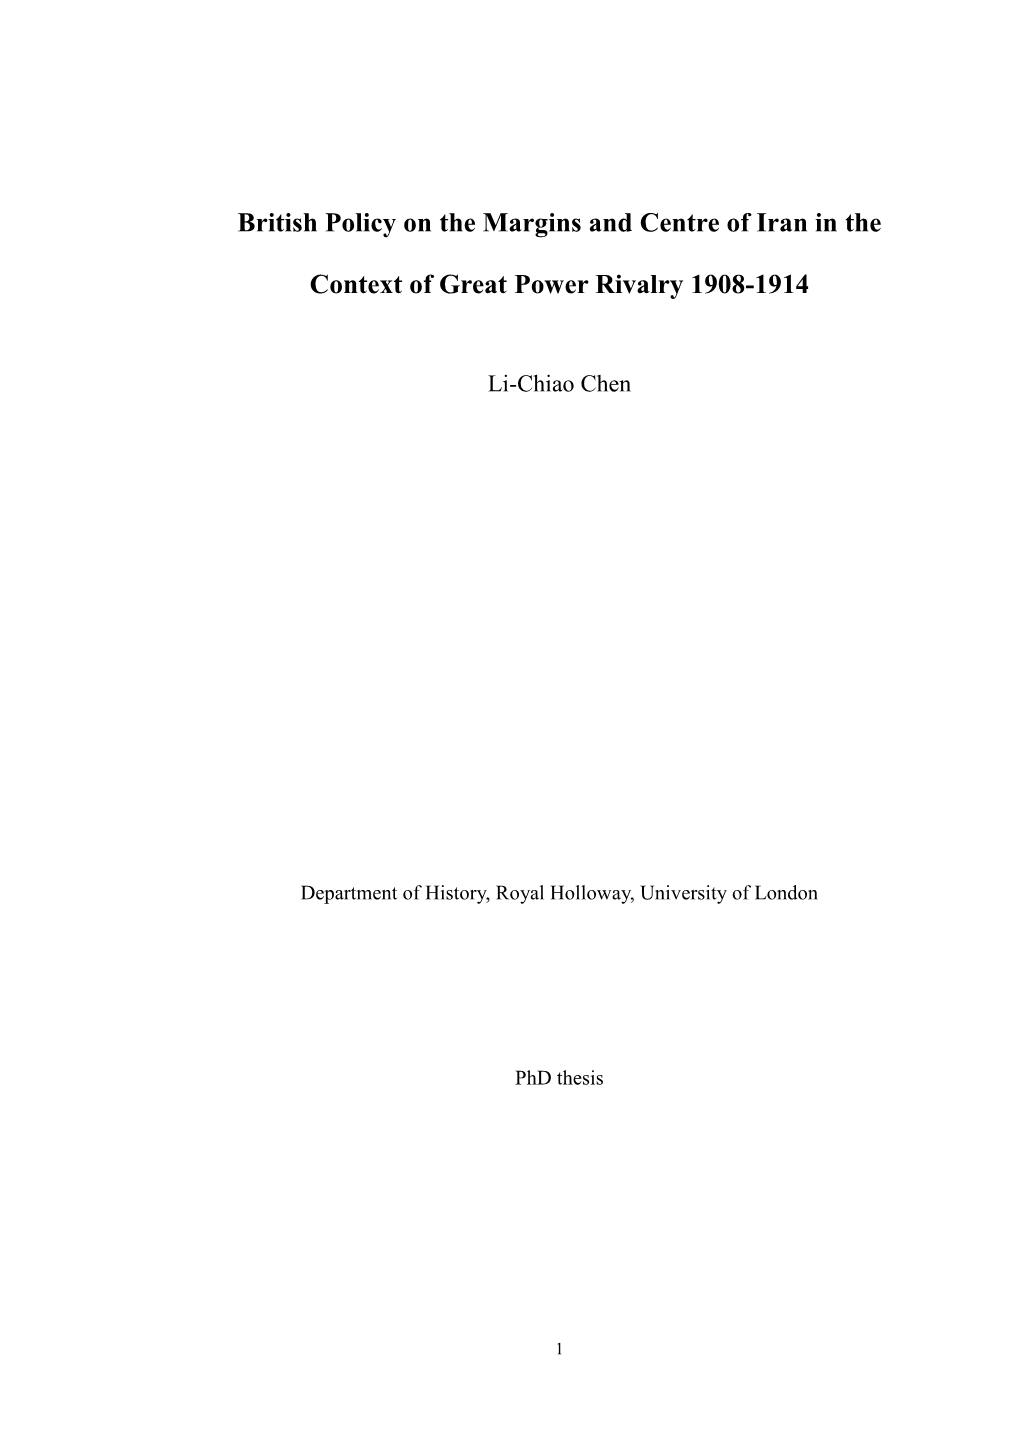 British Policy on the Margins and Centre of Iran in the Context Of